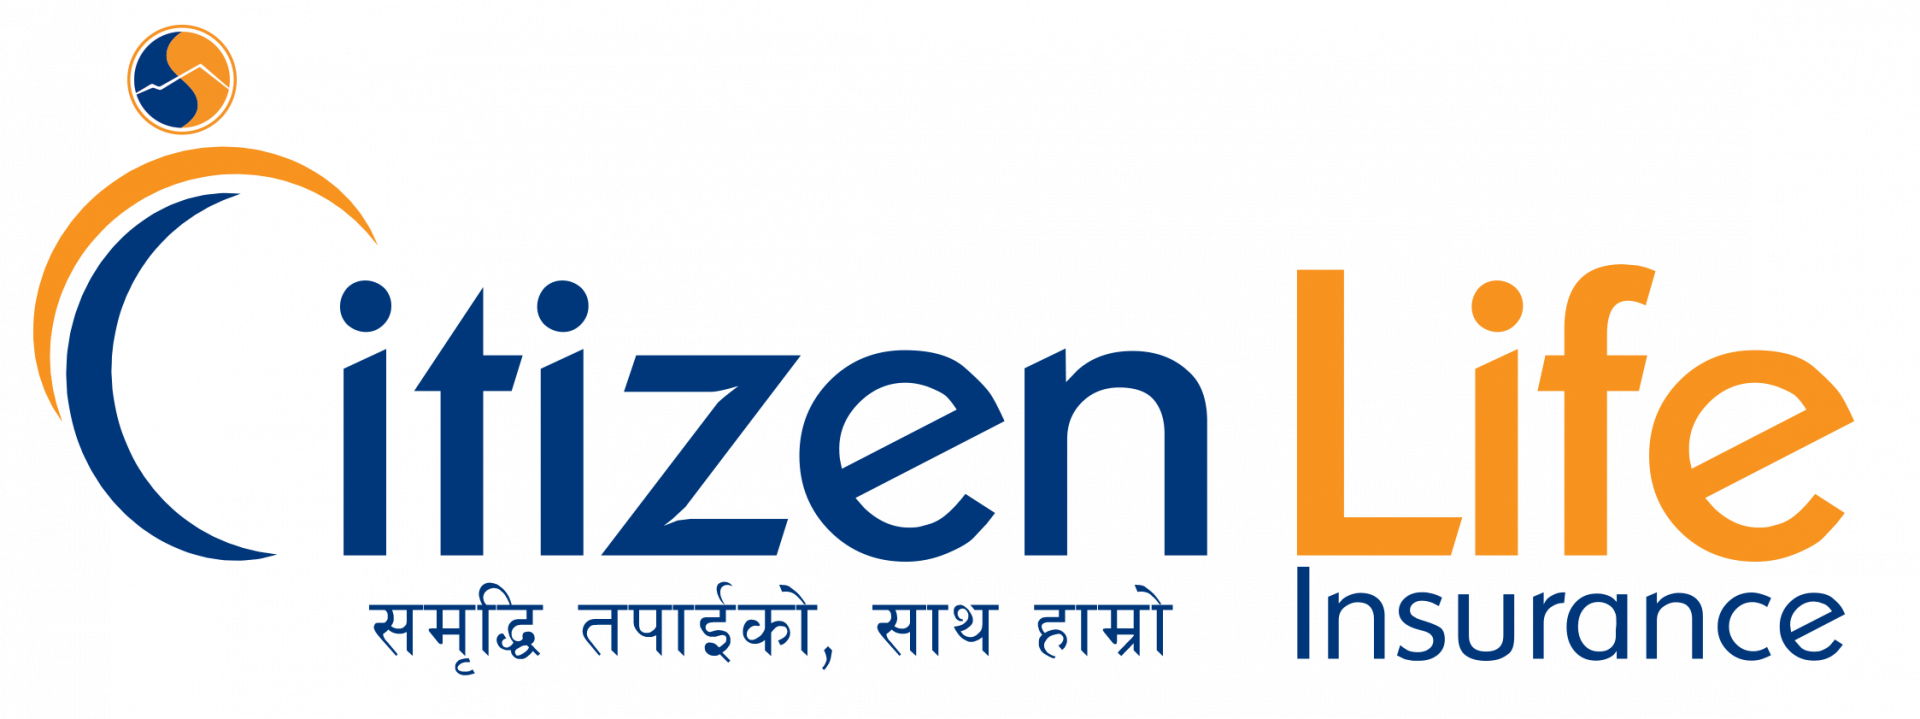 Citizen Life Insurance approaches to SEBON for IPOs at premium